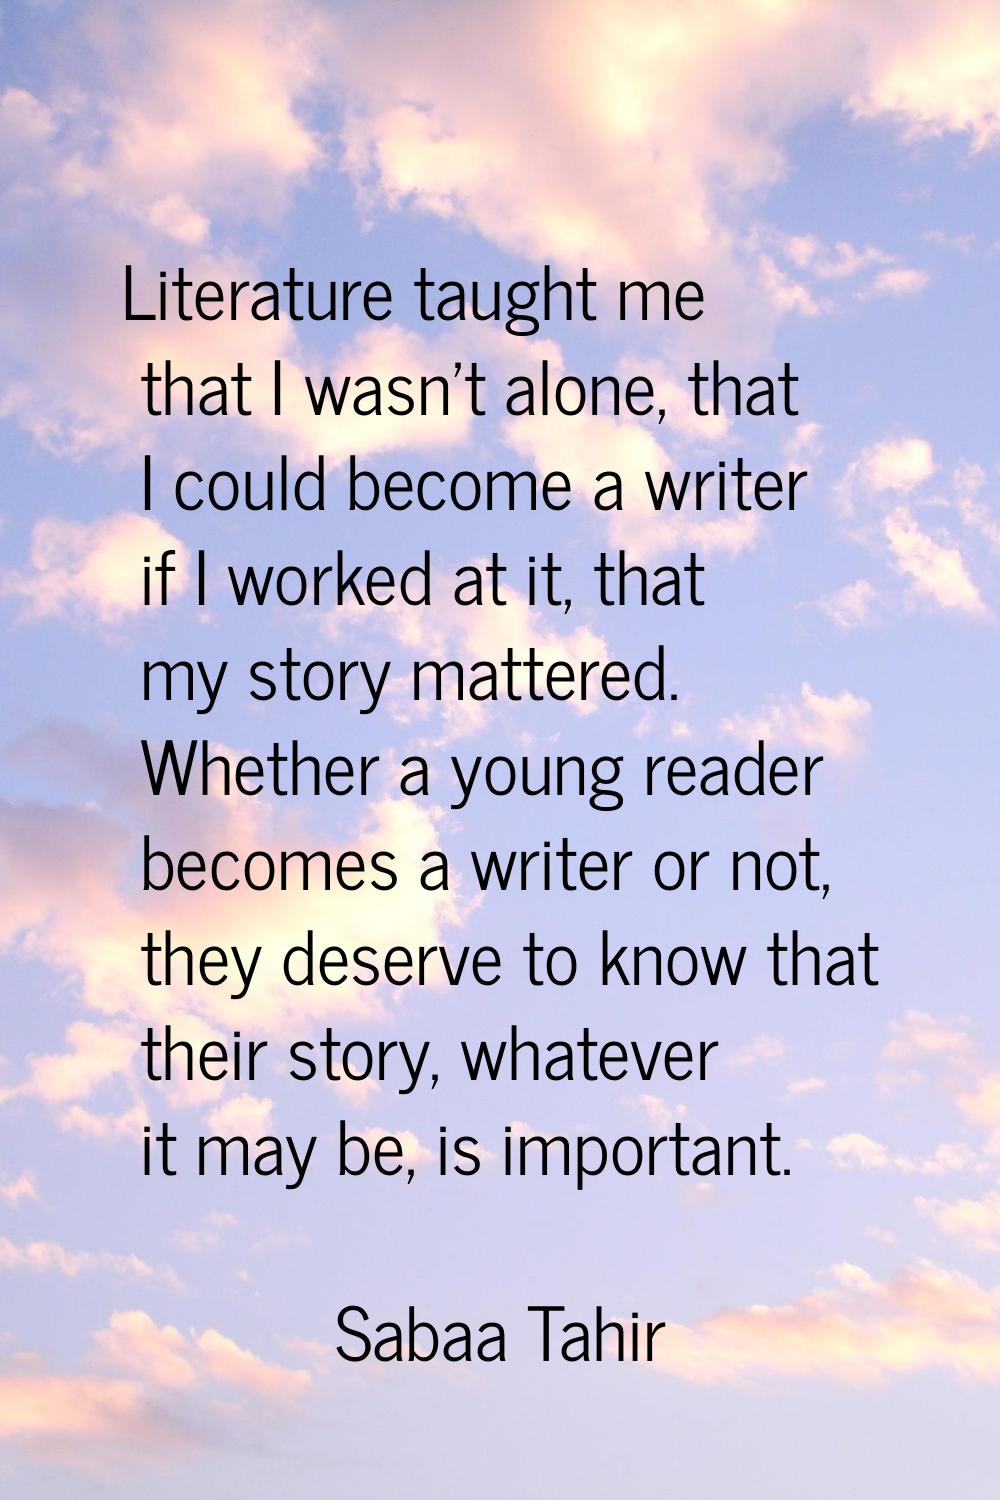 Literature taught me that I wasn't alone, that I could become a writer if I worked at it, that my s